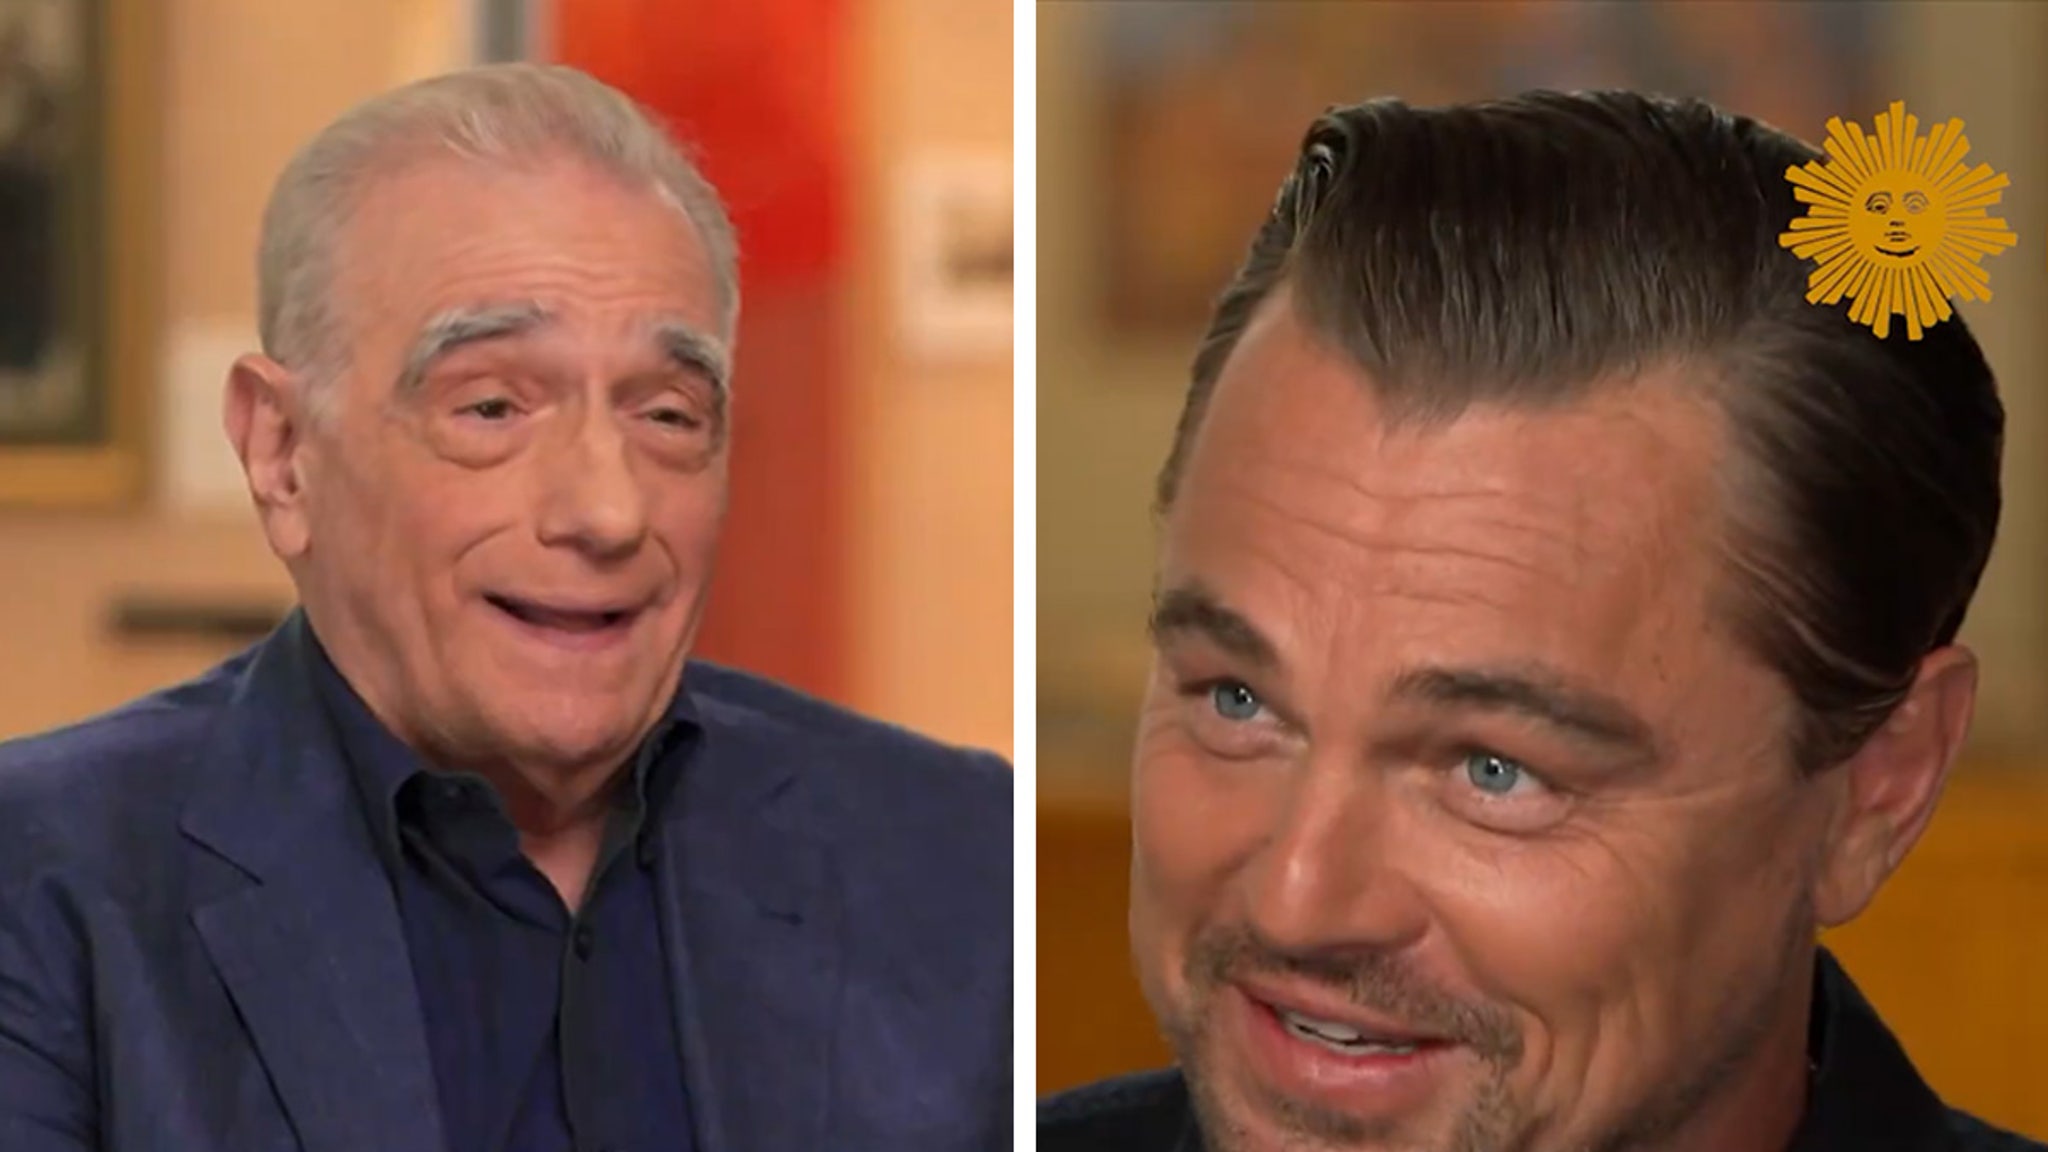 Scorsese Uses ‘Short-Hand’ with De Niro, ‘Long-Hand’ with DiCaprio